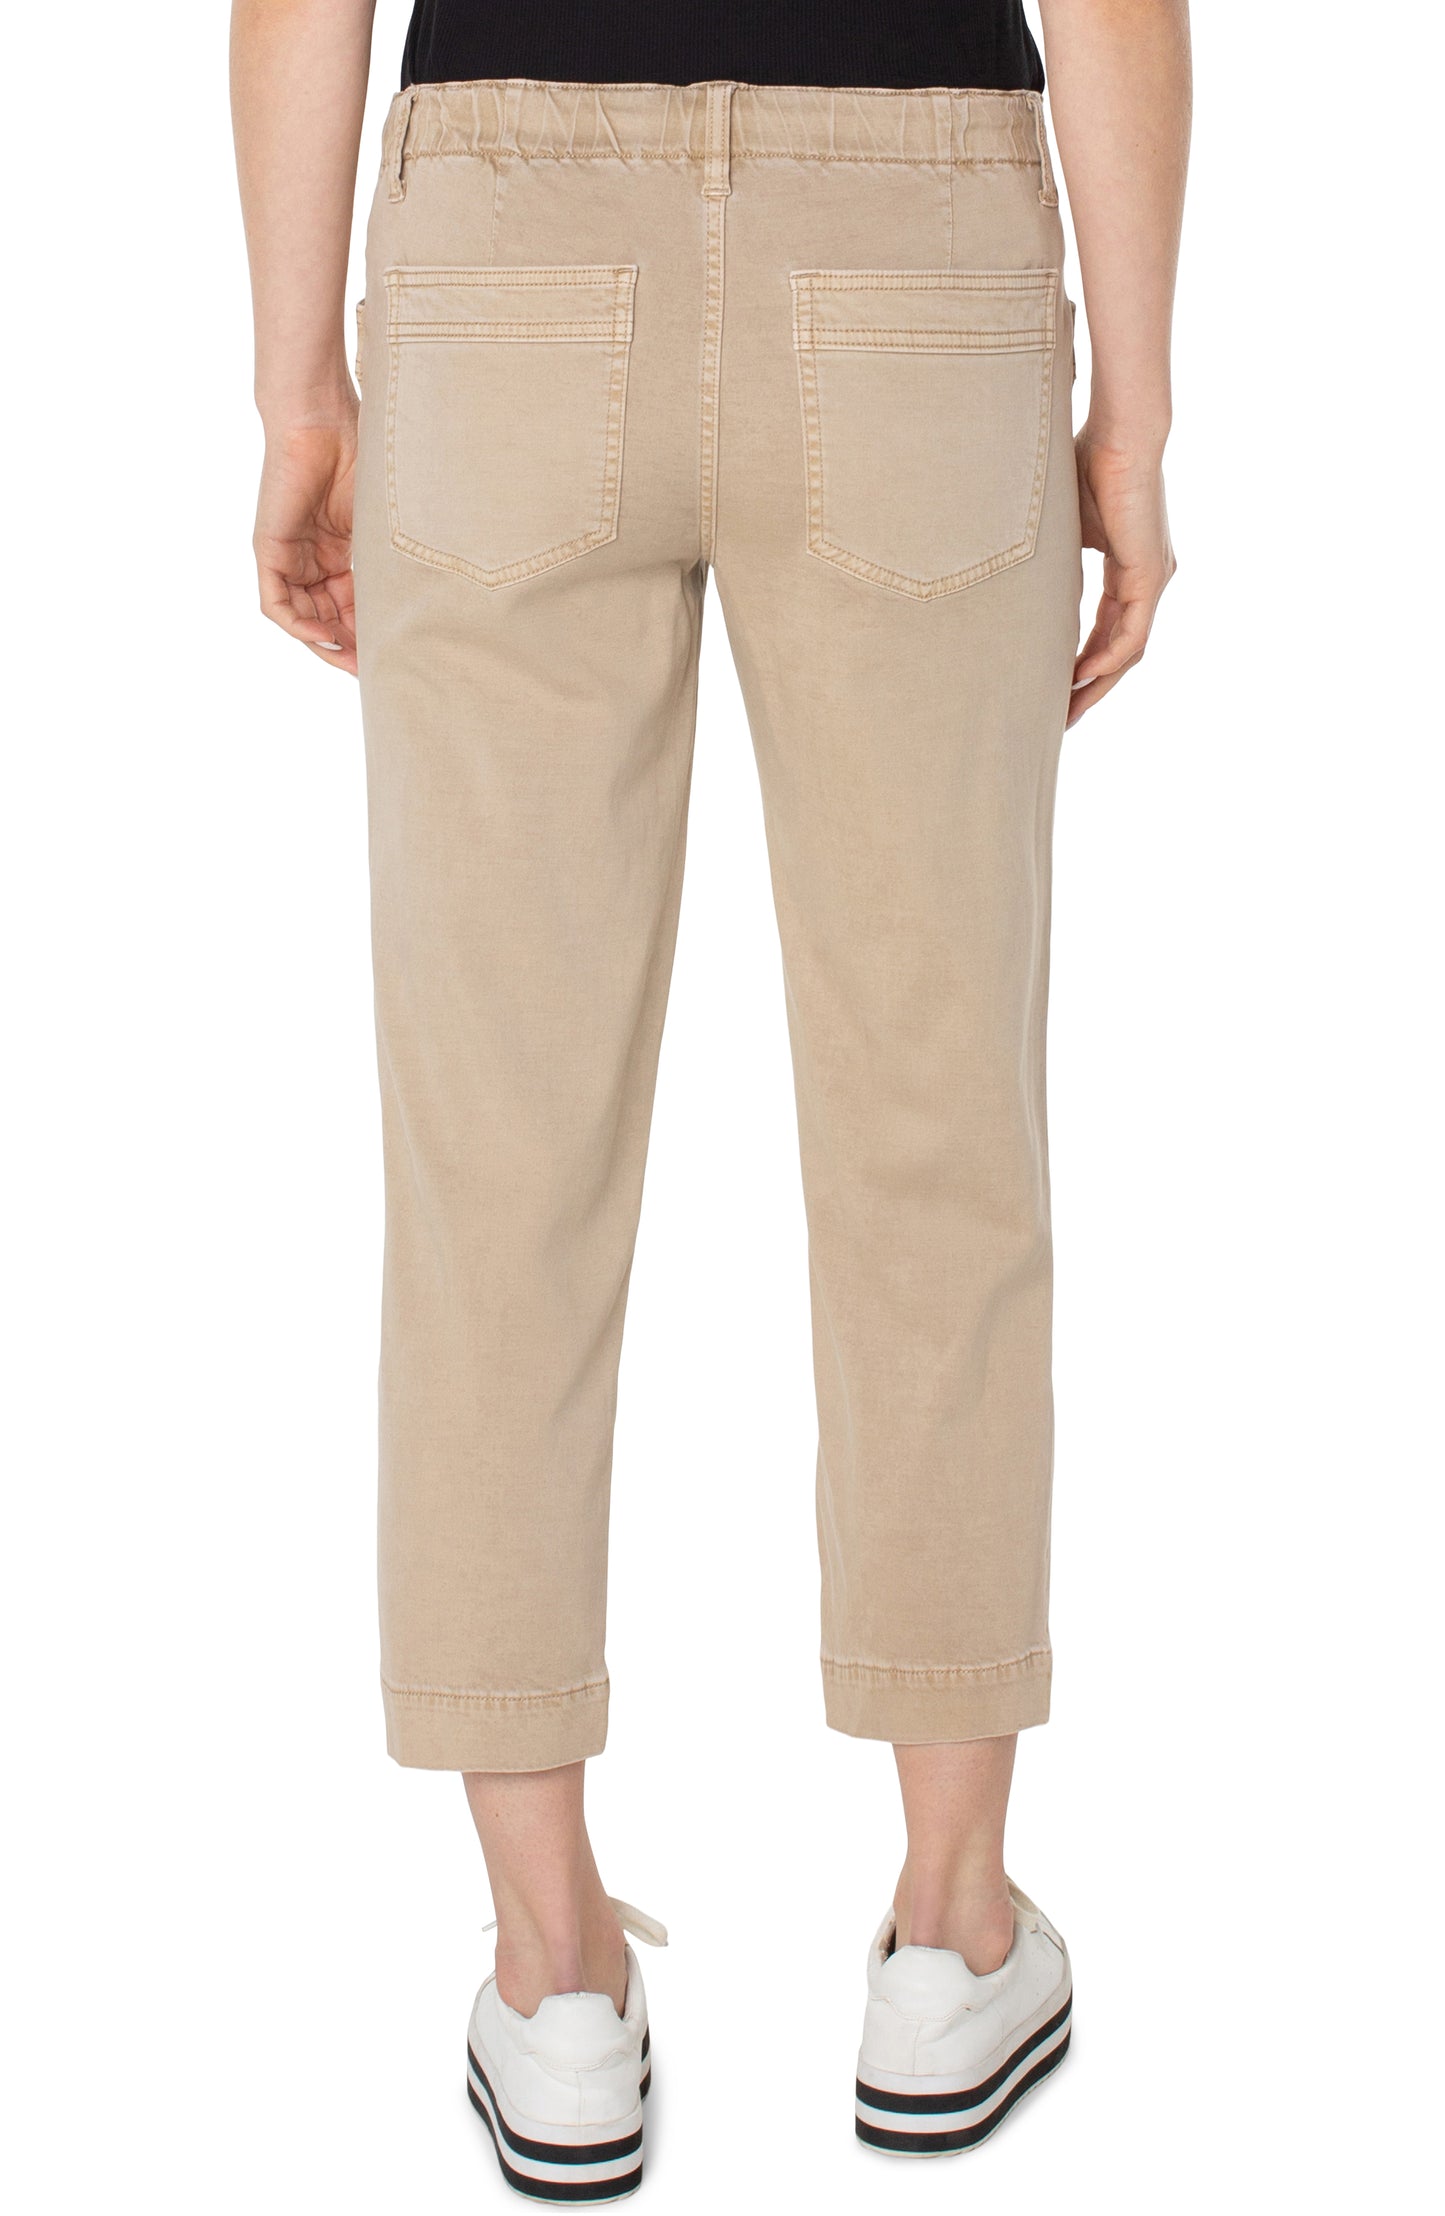 Liverpool Rascal Trouser With Patch Pockets